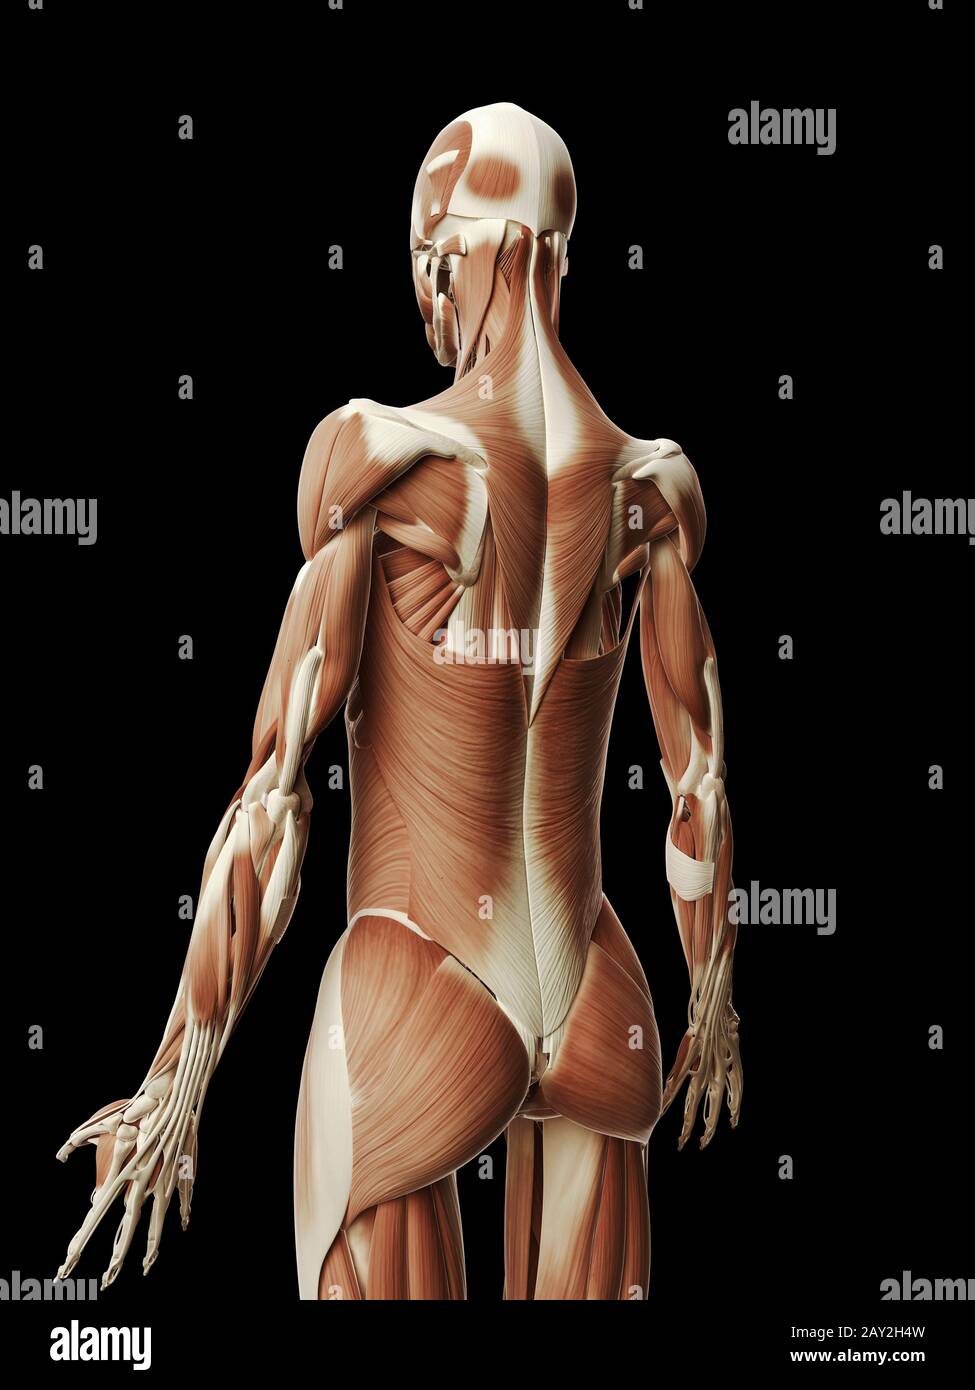 medical illustration of the female muscles Stock Photo